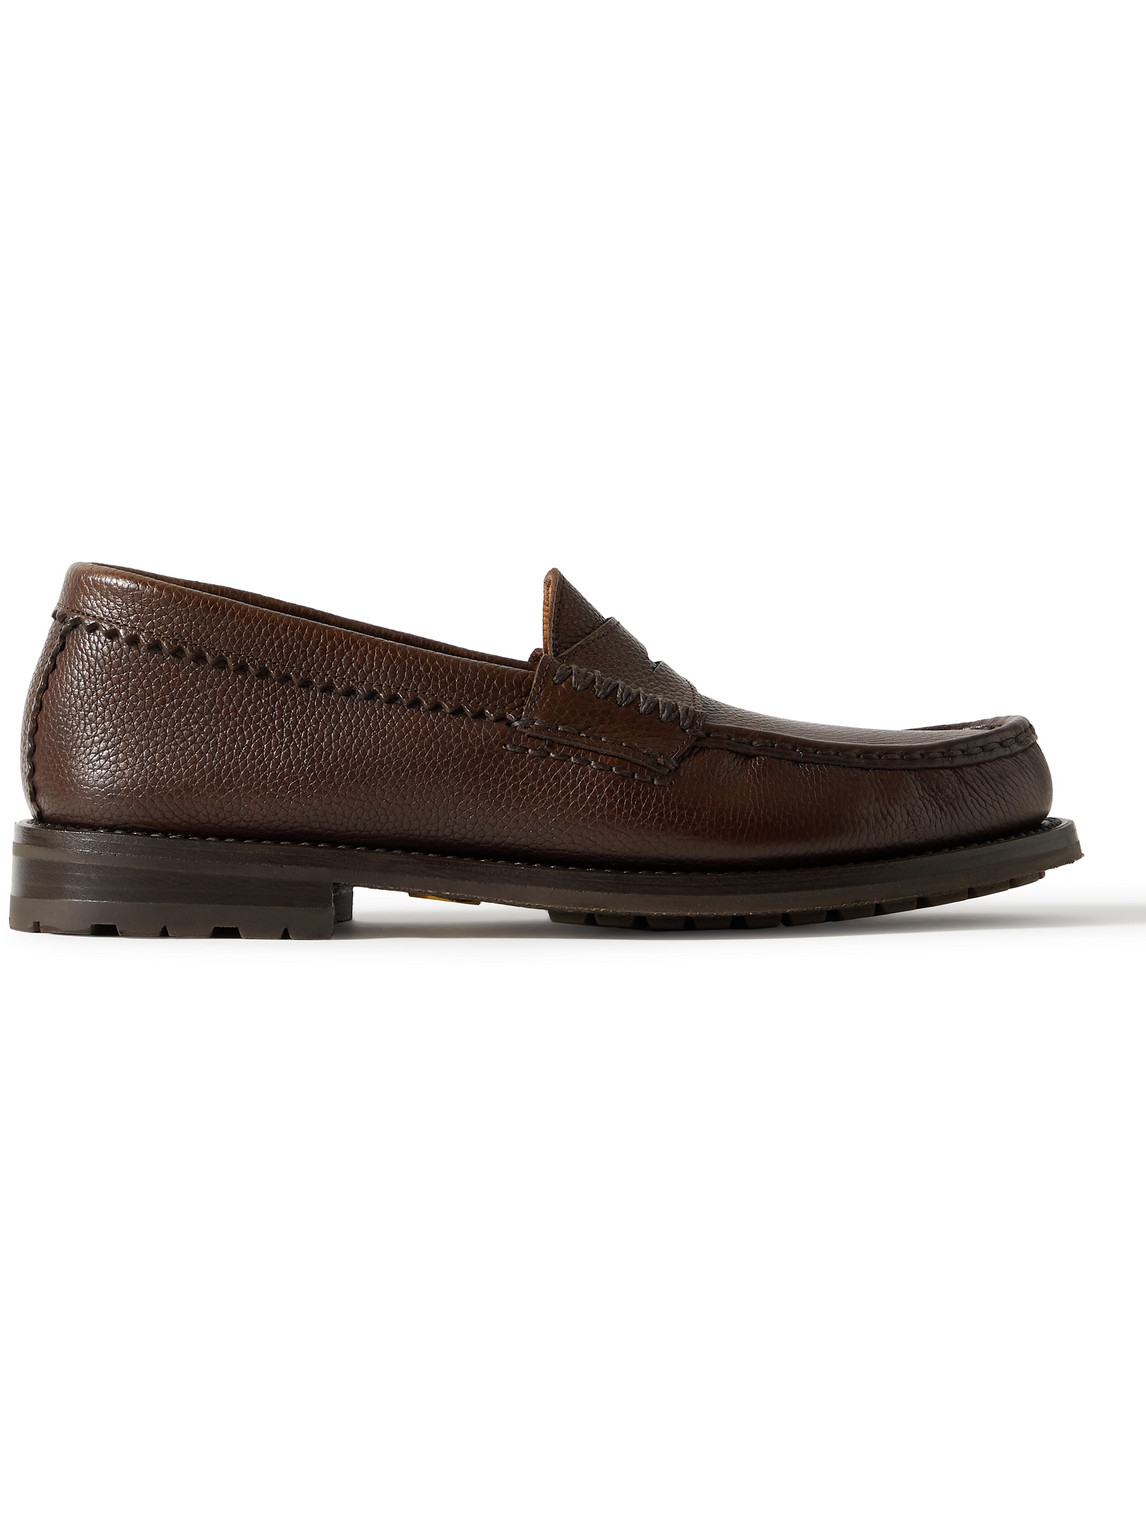 Rob's Full-Grain Leather Penny Loafers